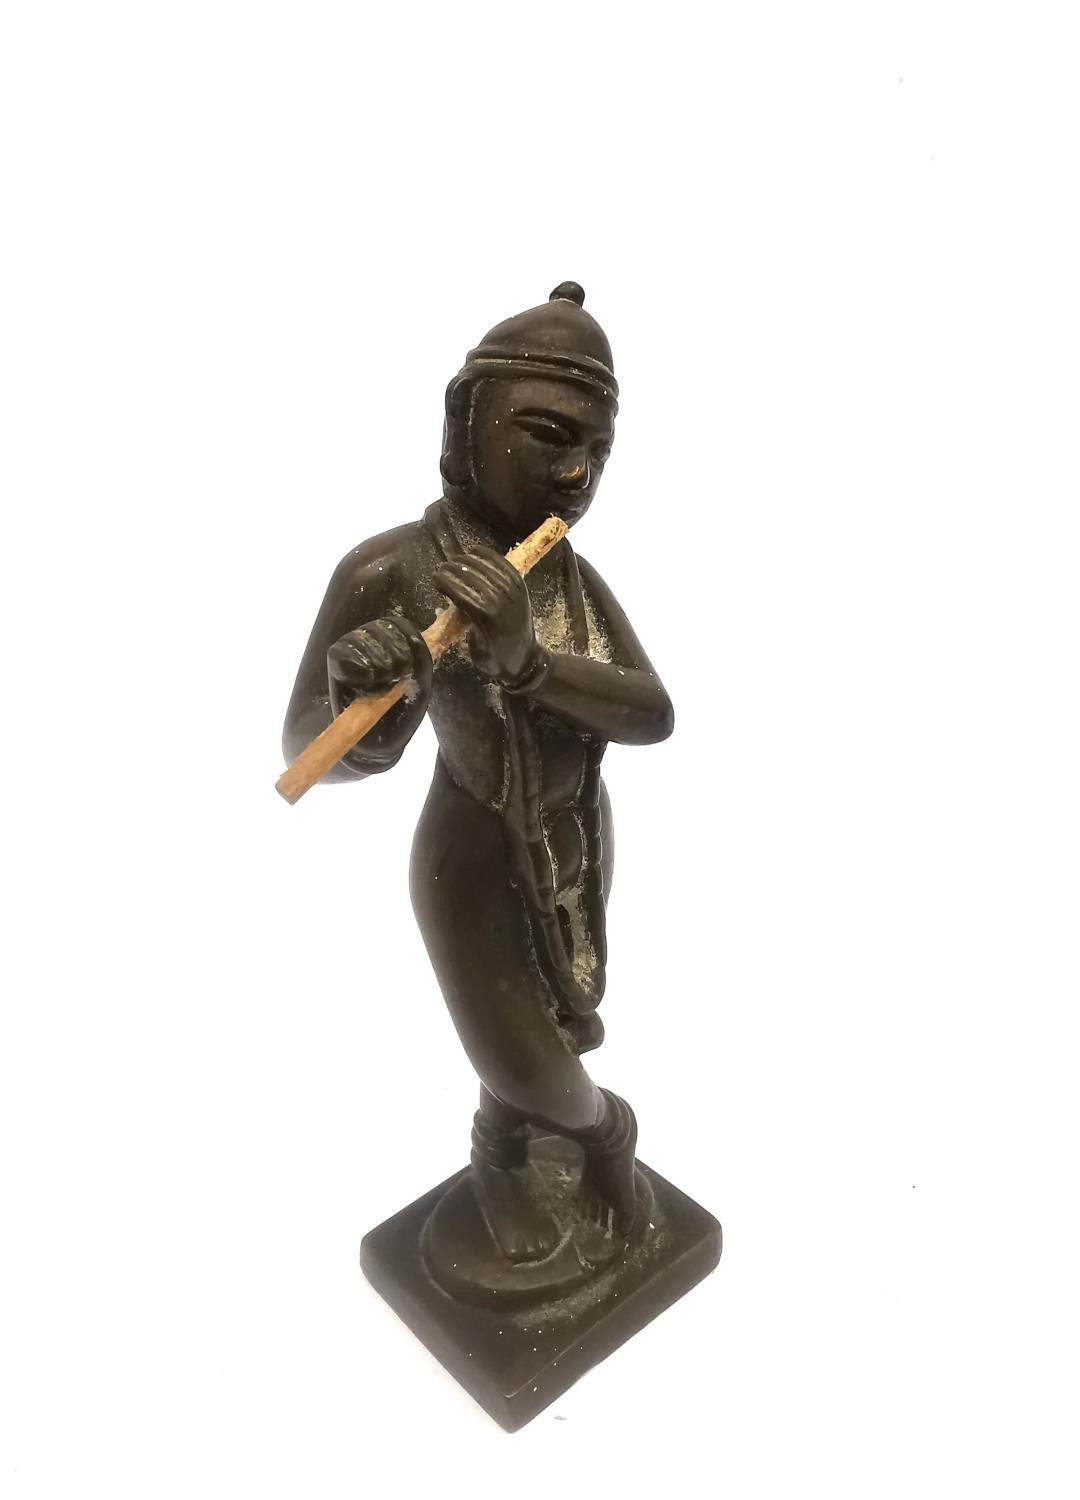 A 19th century Indian bronze figure of Krishna in Tri-bhang stance and playing the flute. H.12.5cm. - Image 6 of 8